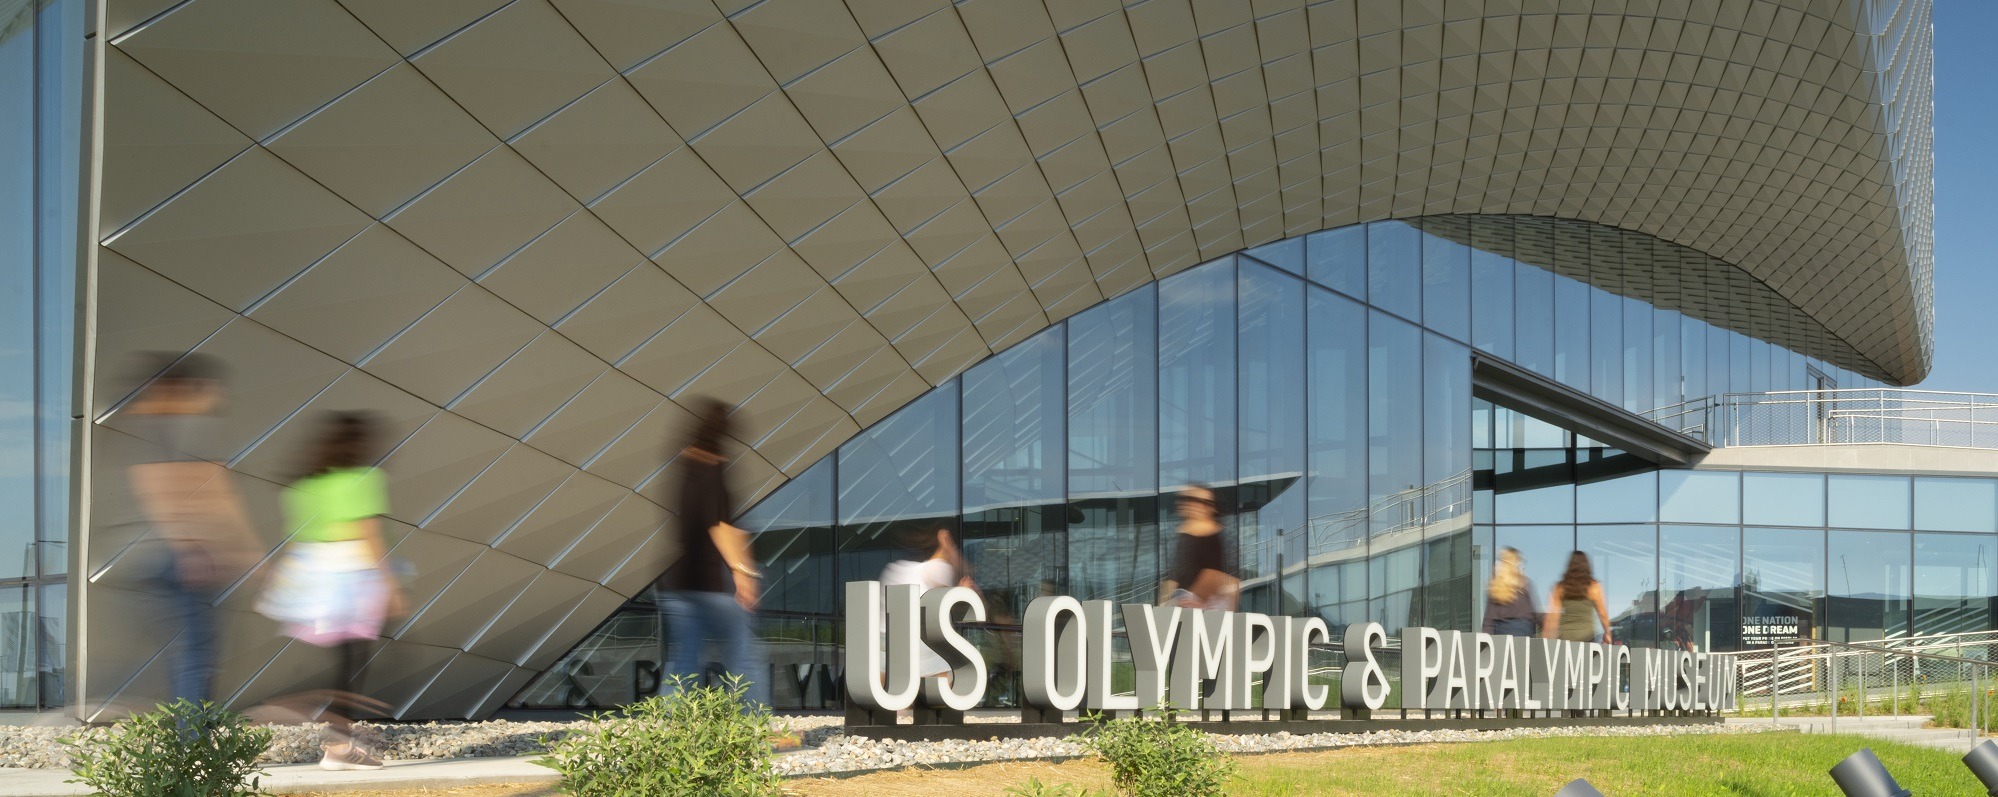 U.S. Olympic & Paralympic Museum in Colorado Springs